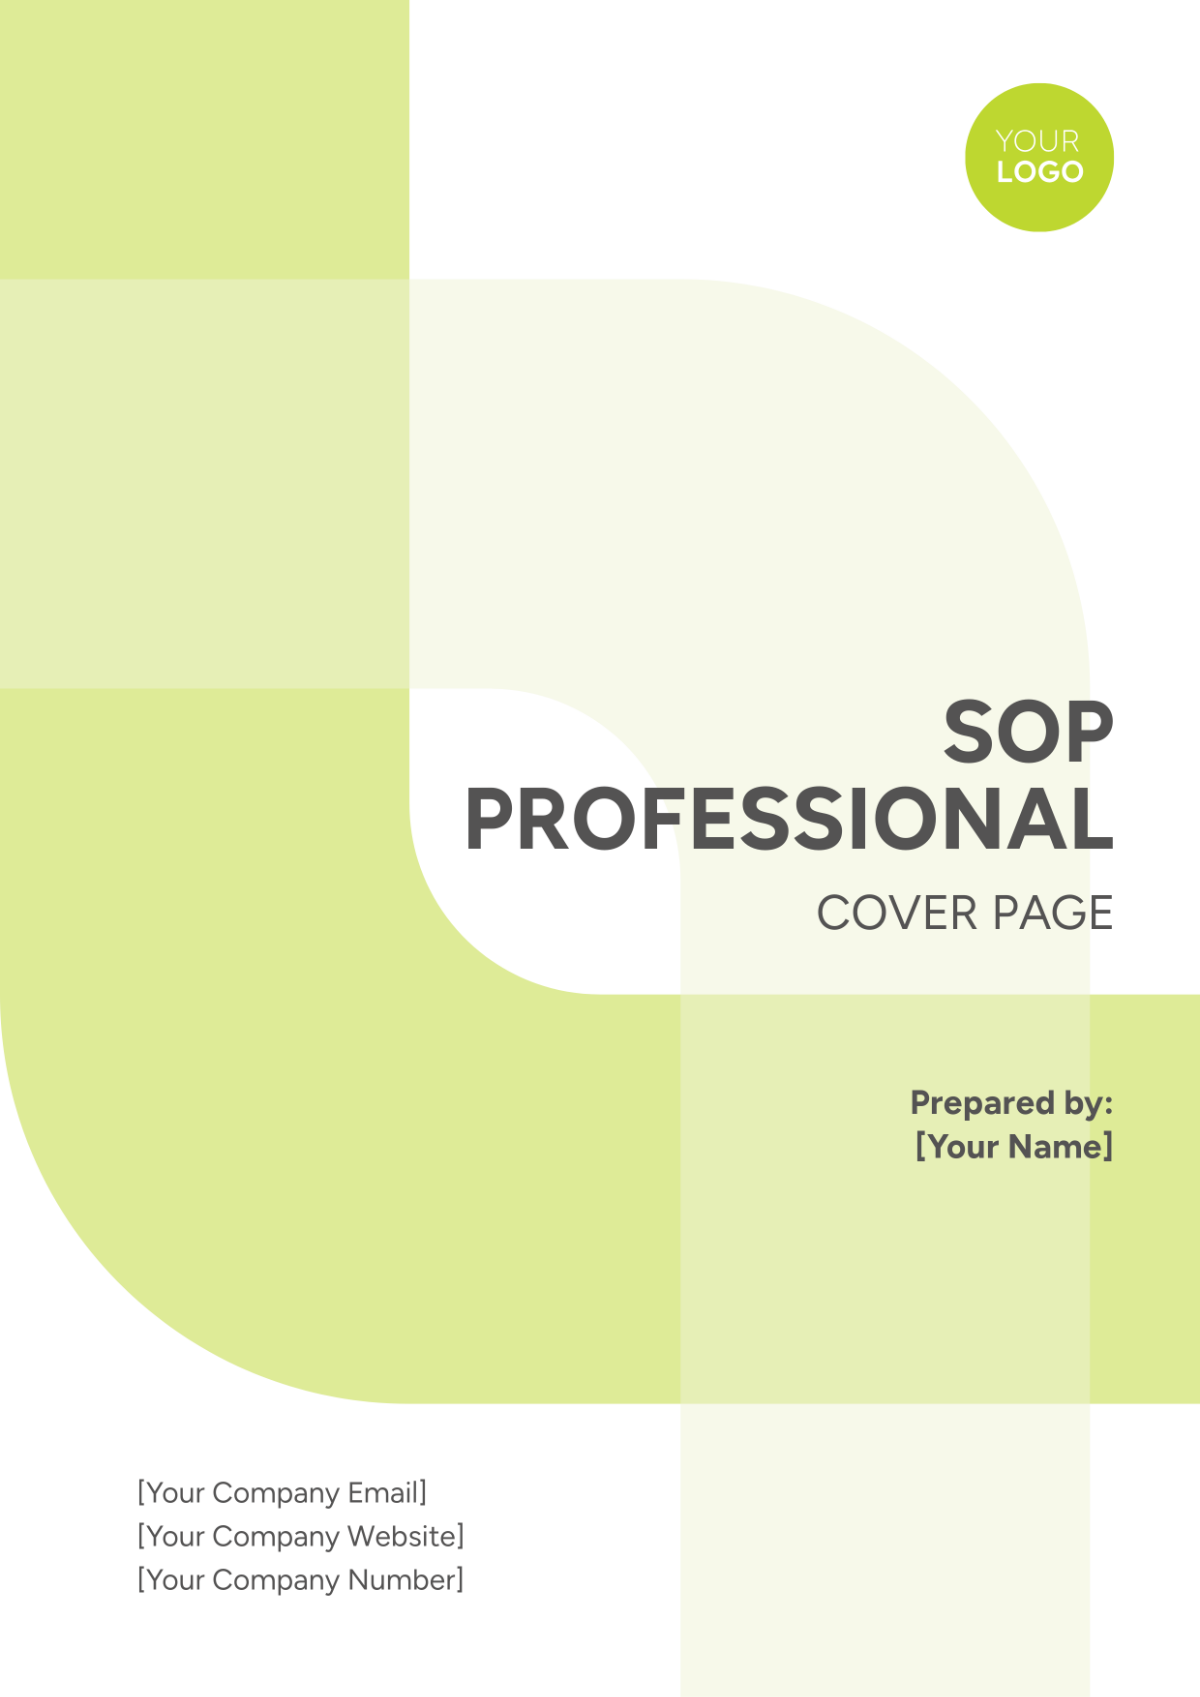 SOP Professional Cover Page